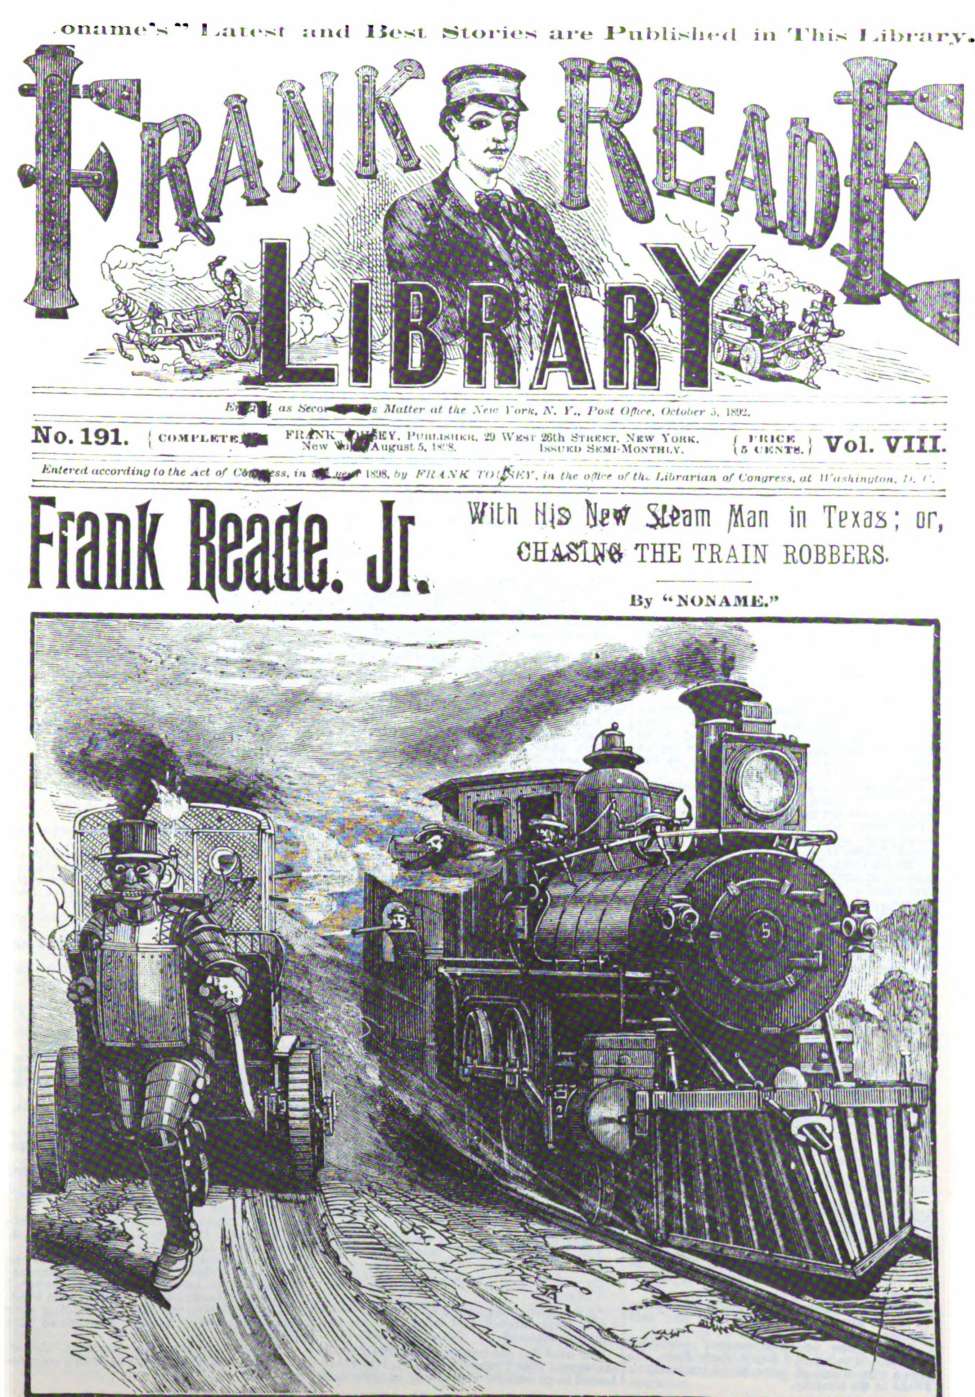 Book Cover For v01 4(191) - Frank Reade with His New Steam Man in Texas